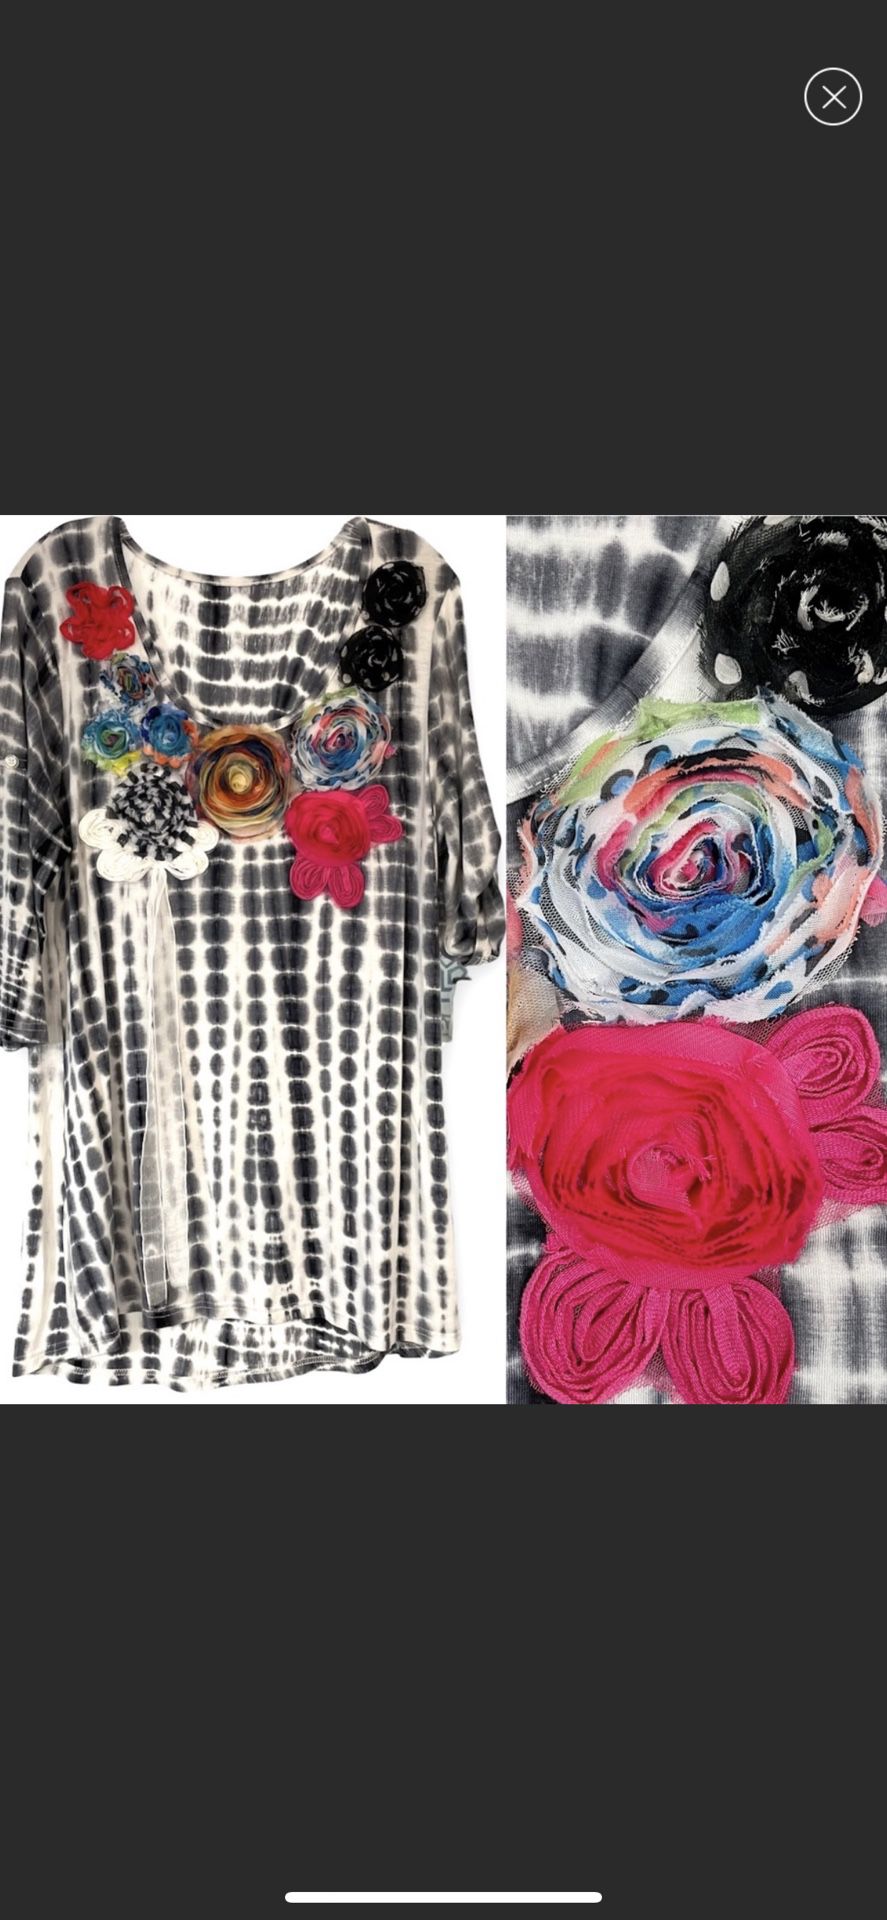 Black and white tie-dye swing top tunic ribbon flower accents, 3/4 sleeves, Lg